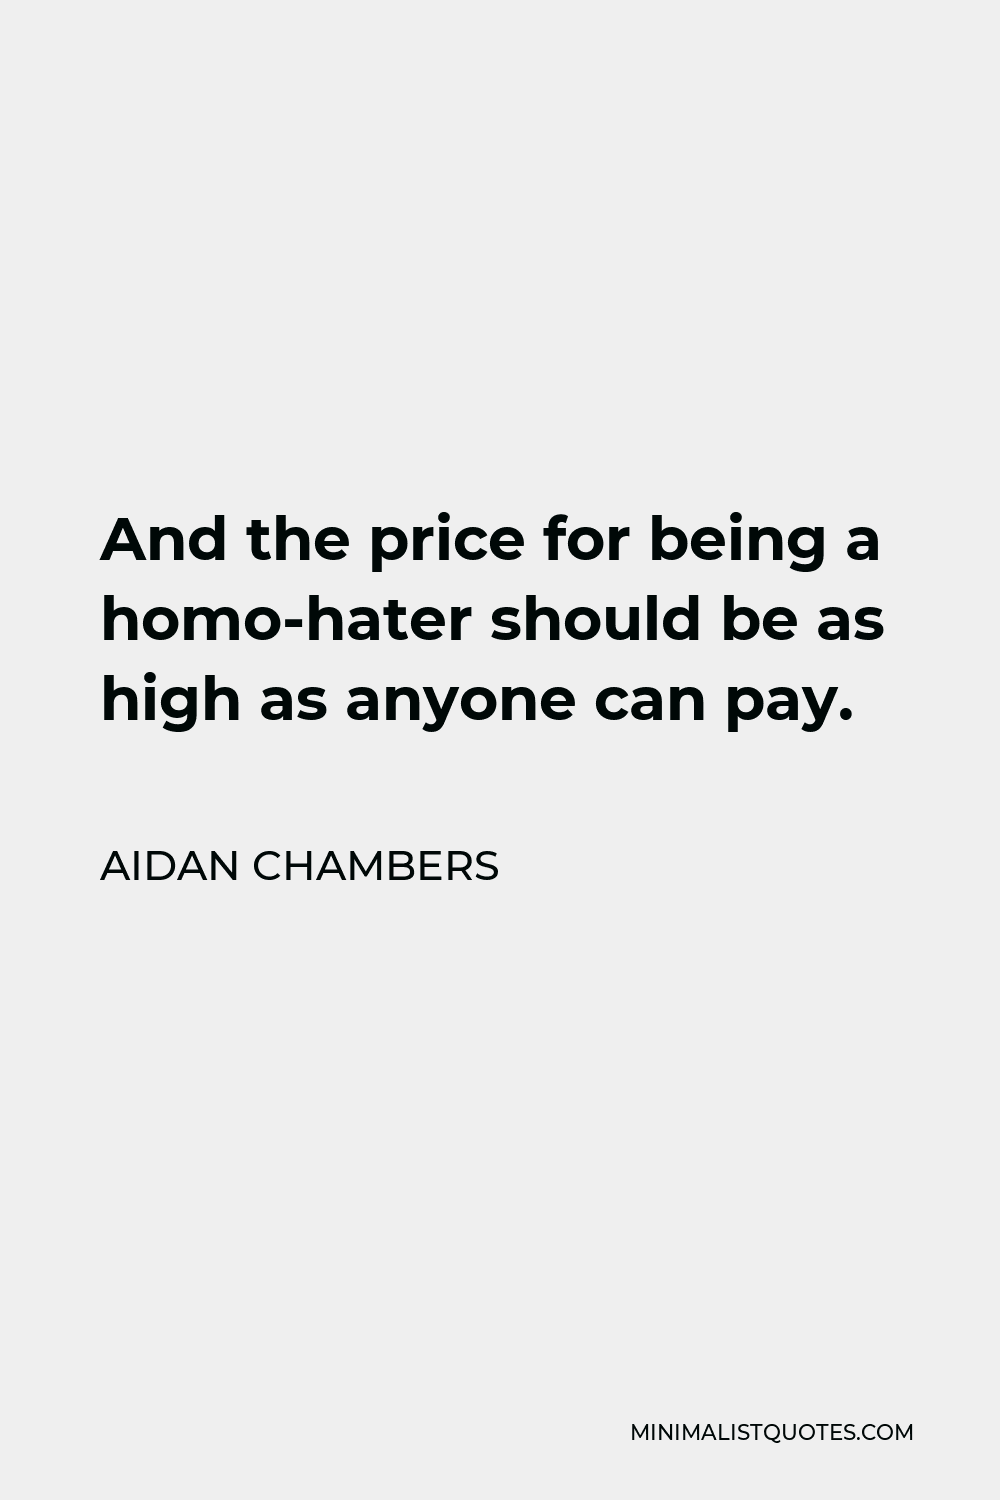 Aidan Chambers Quote - And the price for being a homo-hater should be as high as anyone can pay.